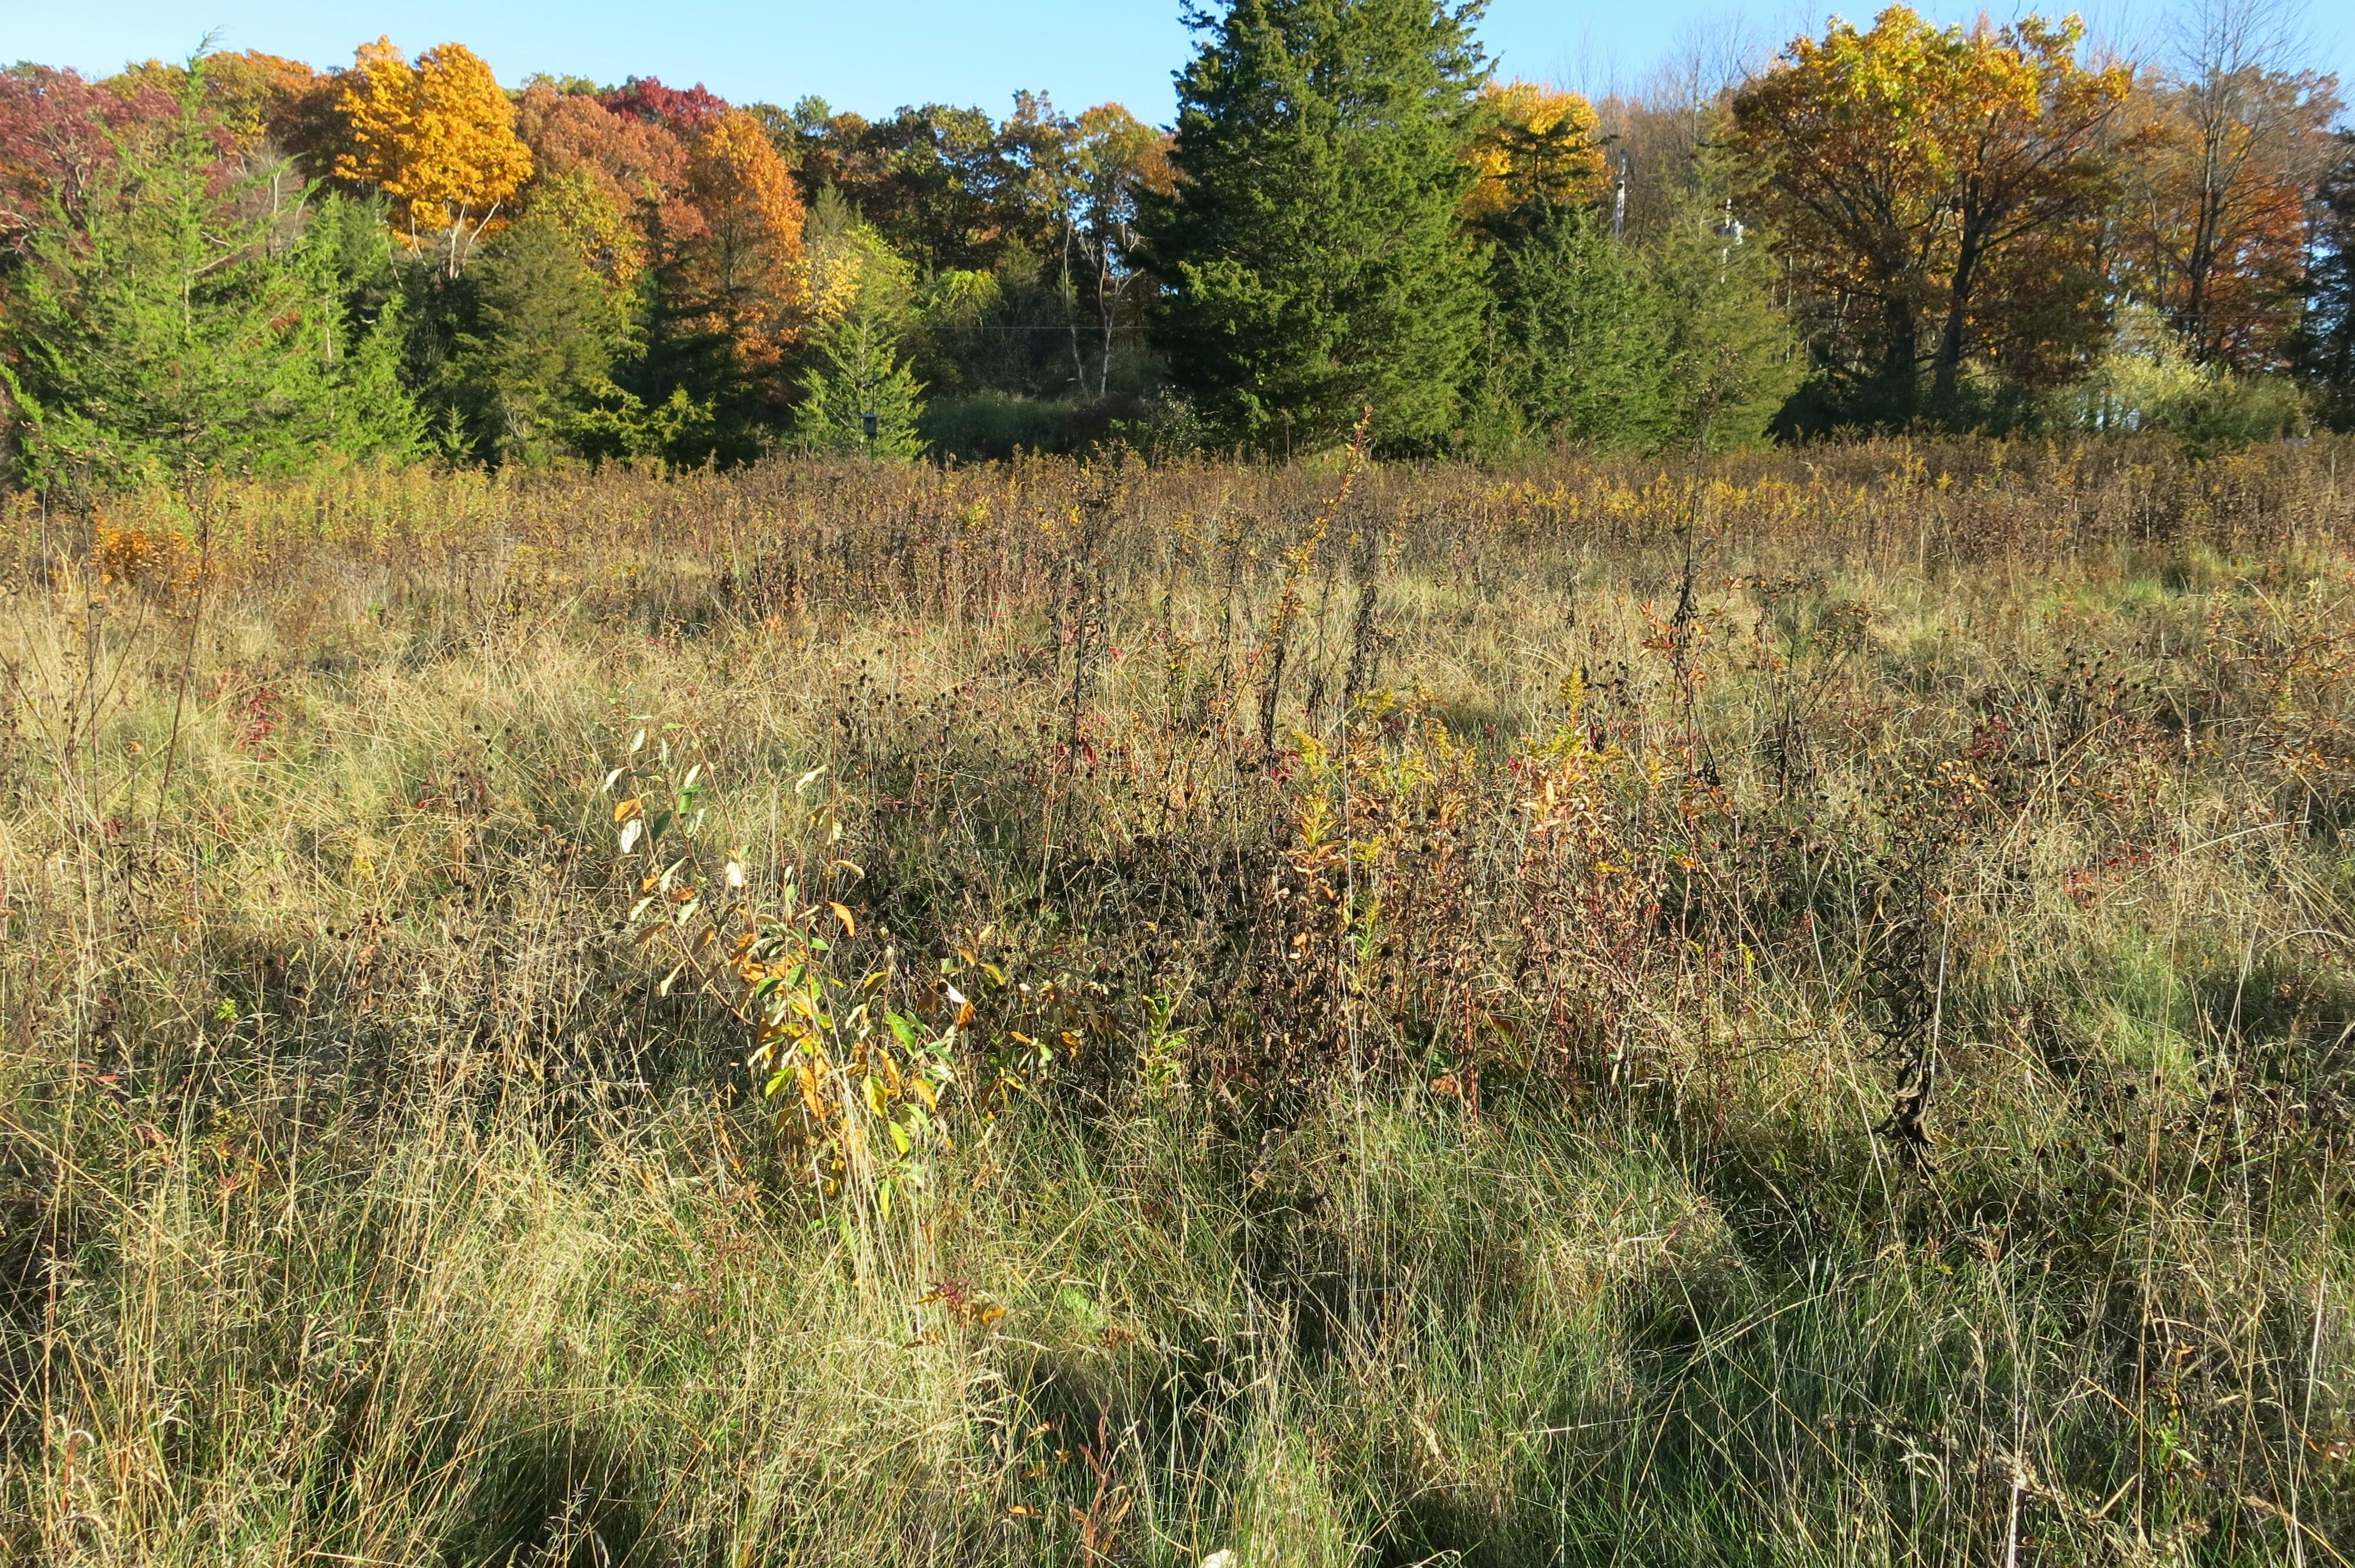 Restored meadow on Dennis Briede's property. Taller trees are visible in the background and the meadow is foreground. Taken in fall.